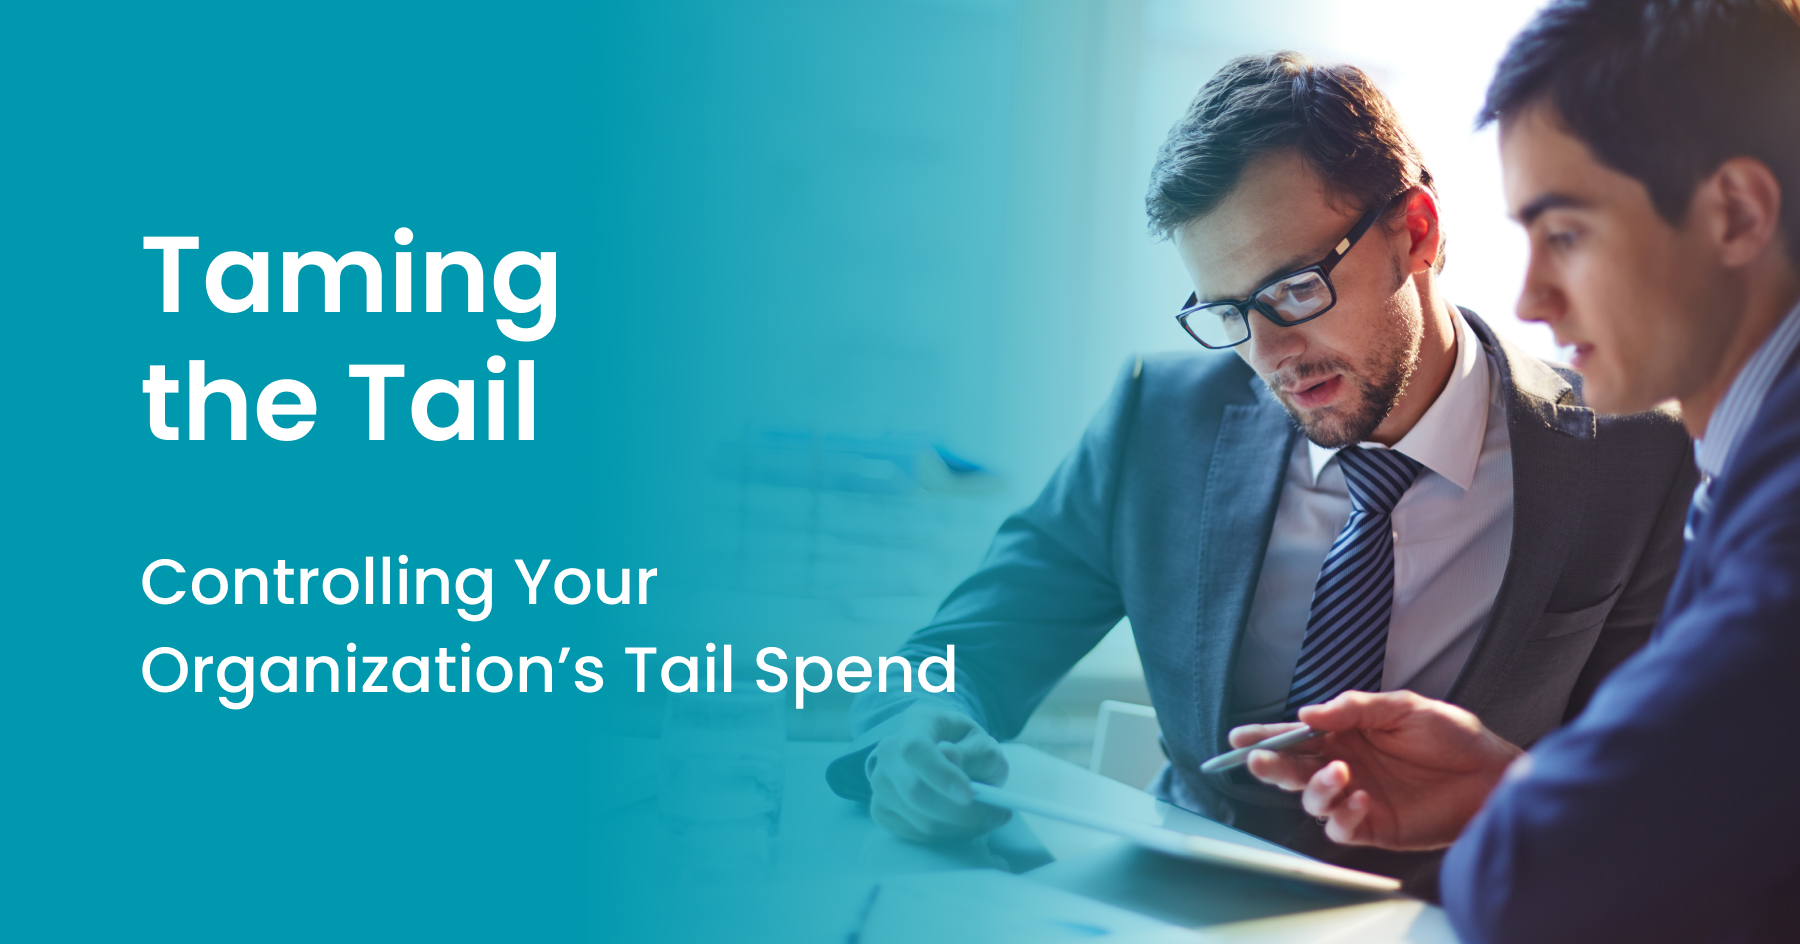 Taming the Tail-Controlling Your Organization’s Tail Spend